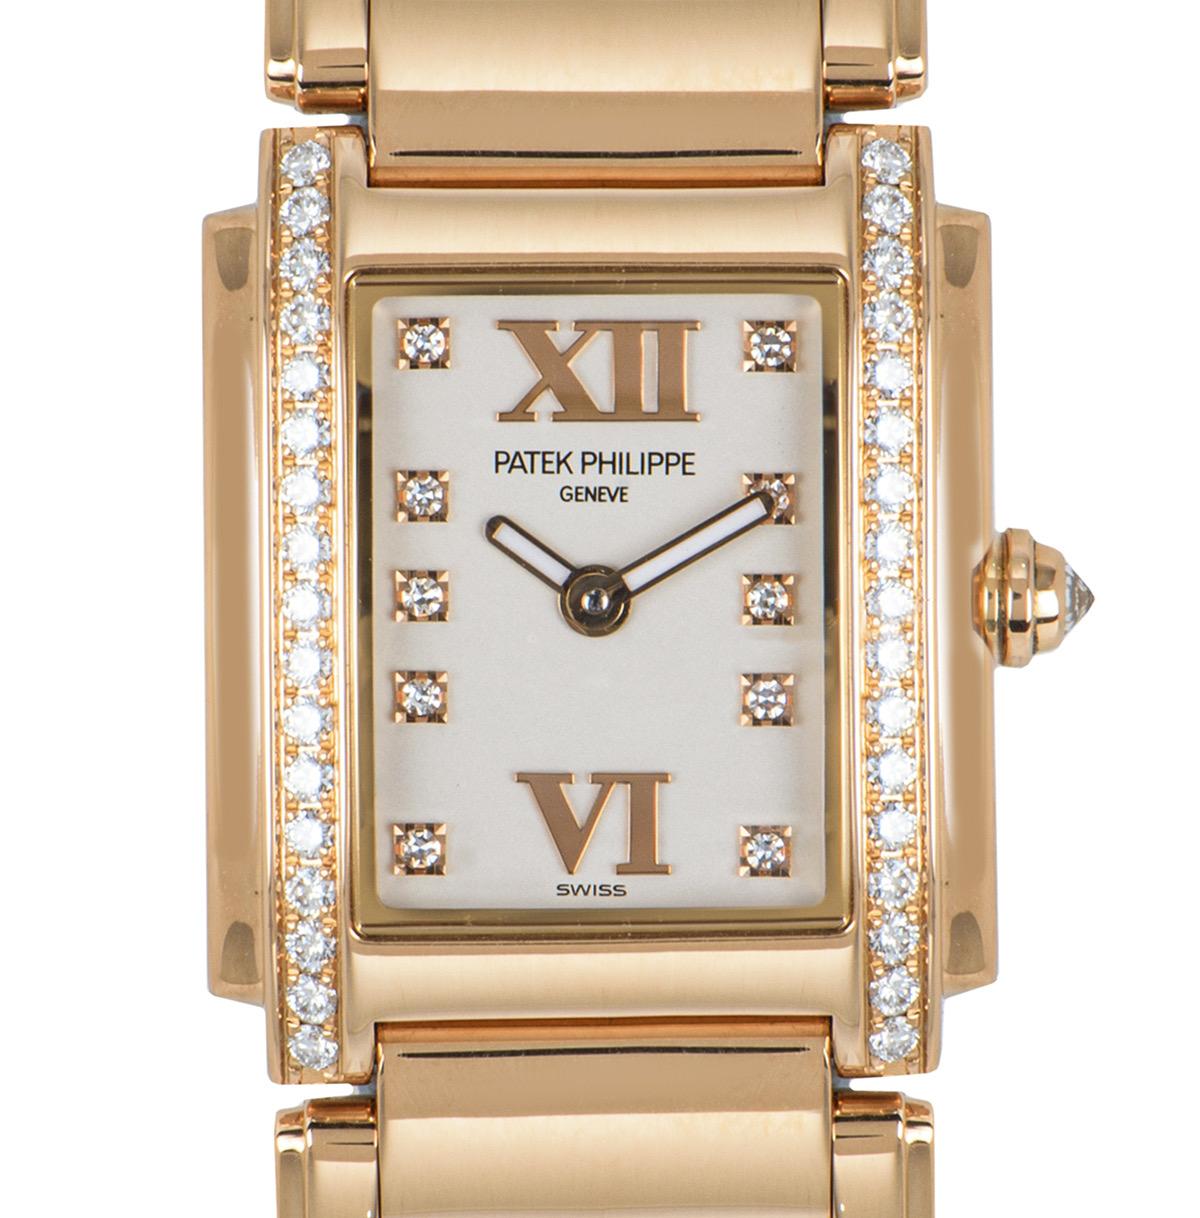 A women's Twenty-4 quartz wristwatch, made from 18k rose gold, by Patek Philippe. 

Features an opaline dial with 10 applied round brilliant cut diamond hour markers, as well as roman numerals VI and XII. Complementing the dial, the bezel is set